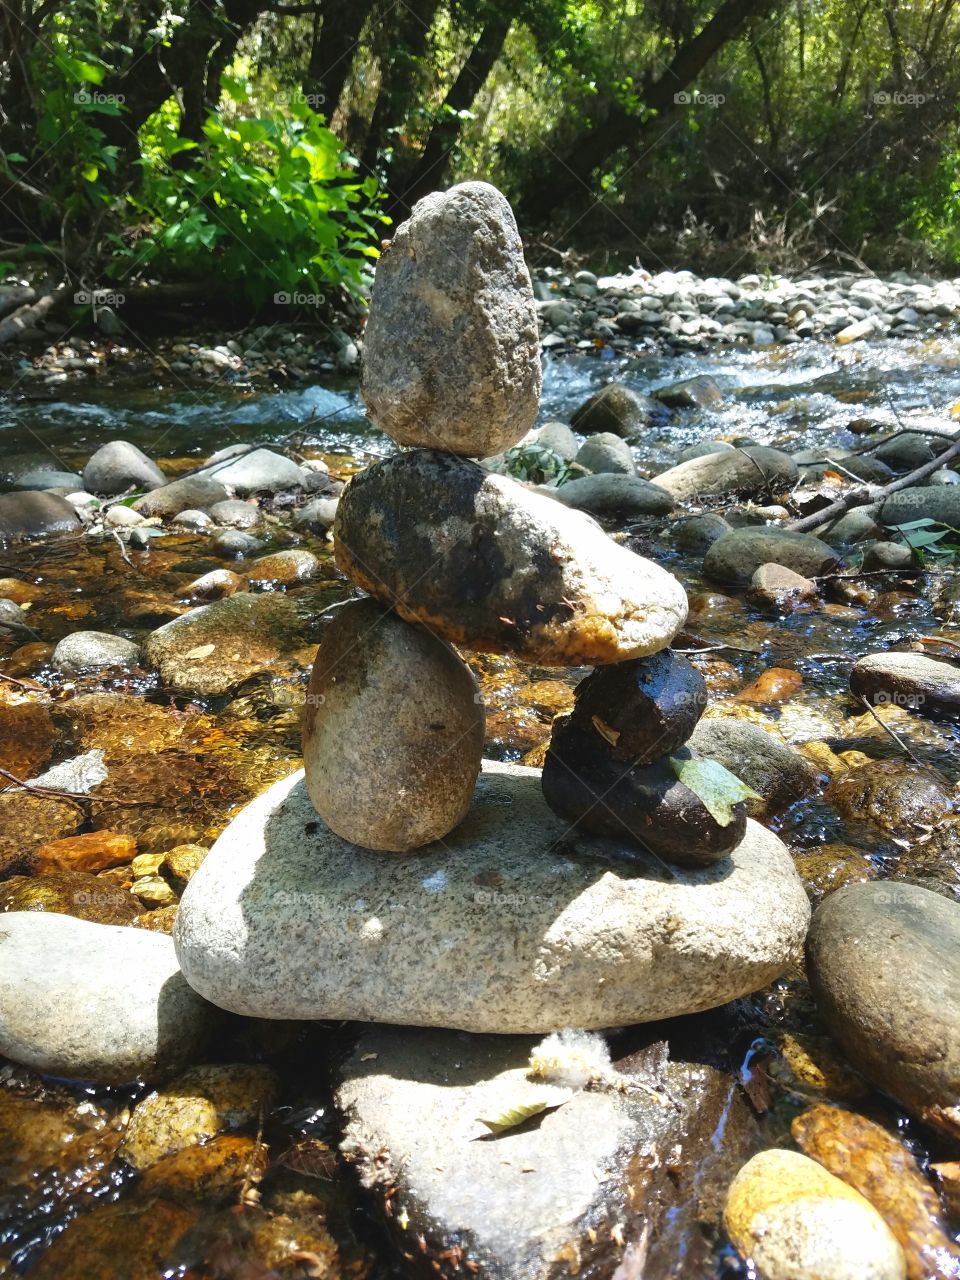 Creative Rockstack with the Rushing River Behund it on a Sunny Day